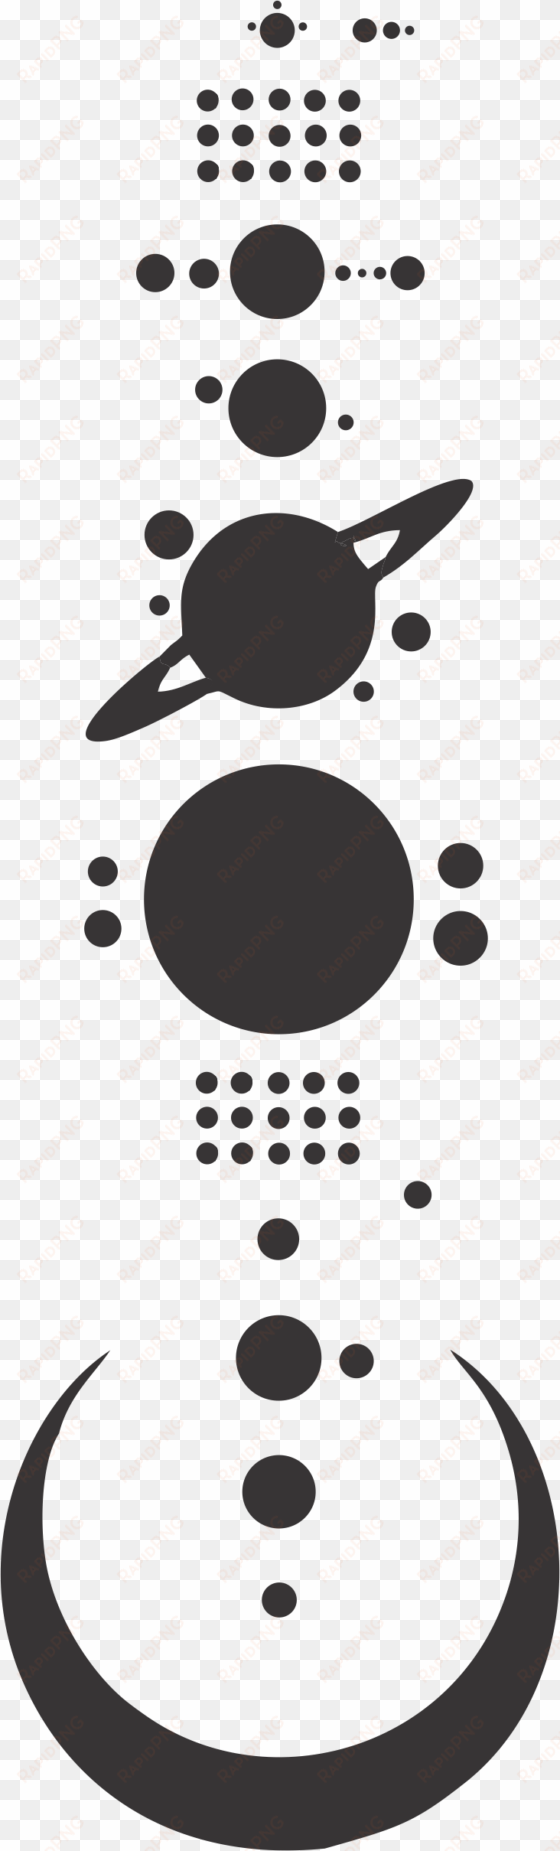 This Is My Next Tattoo - Solar System Tattoo Designs transparent png image